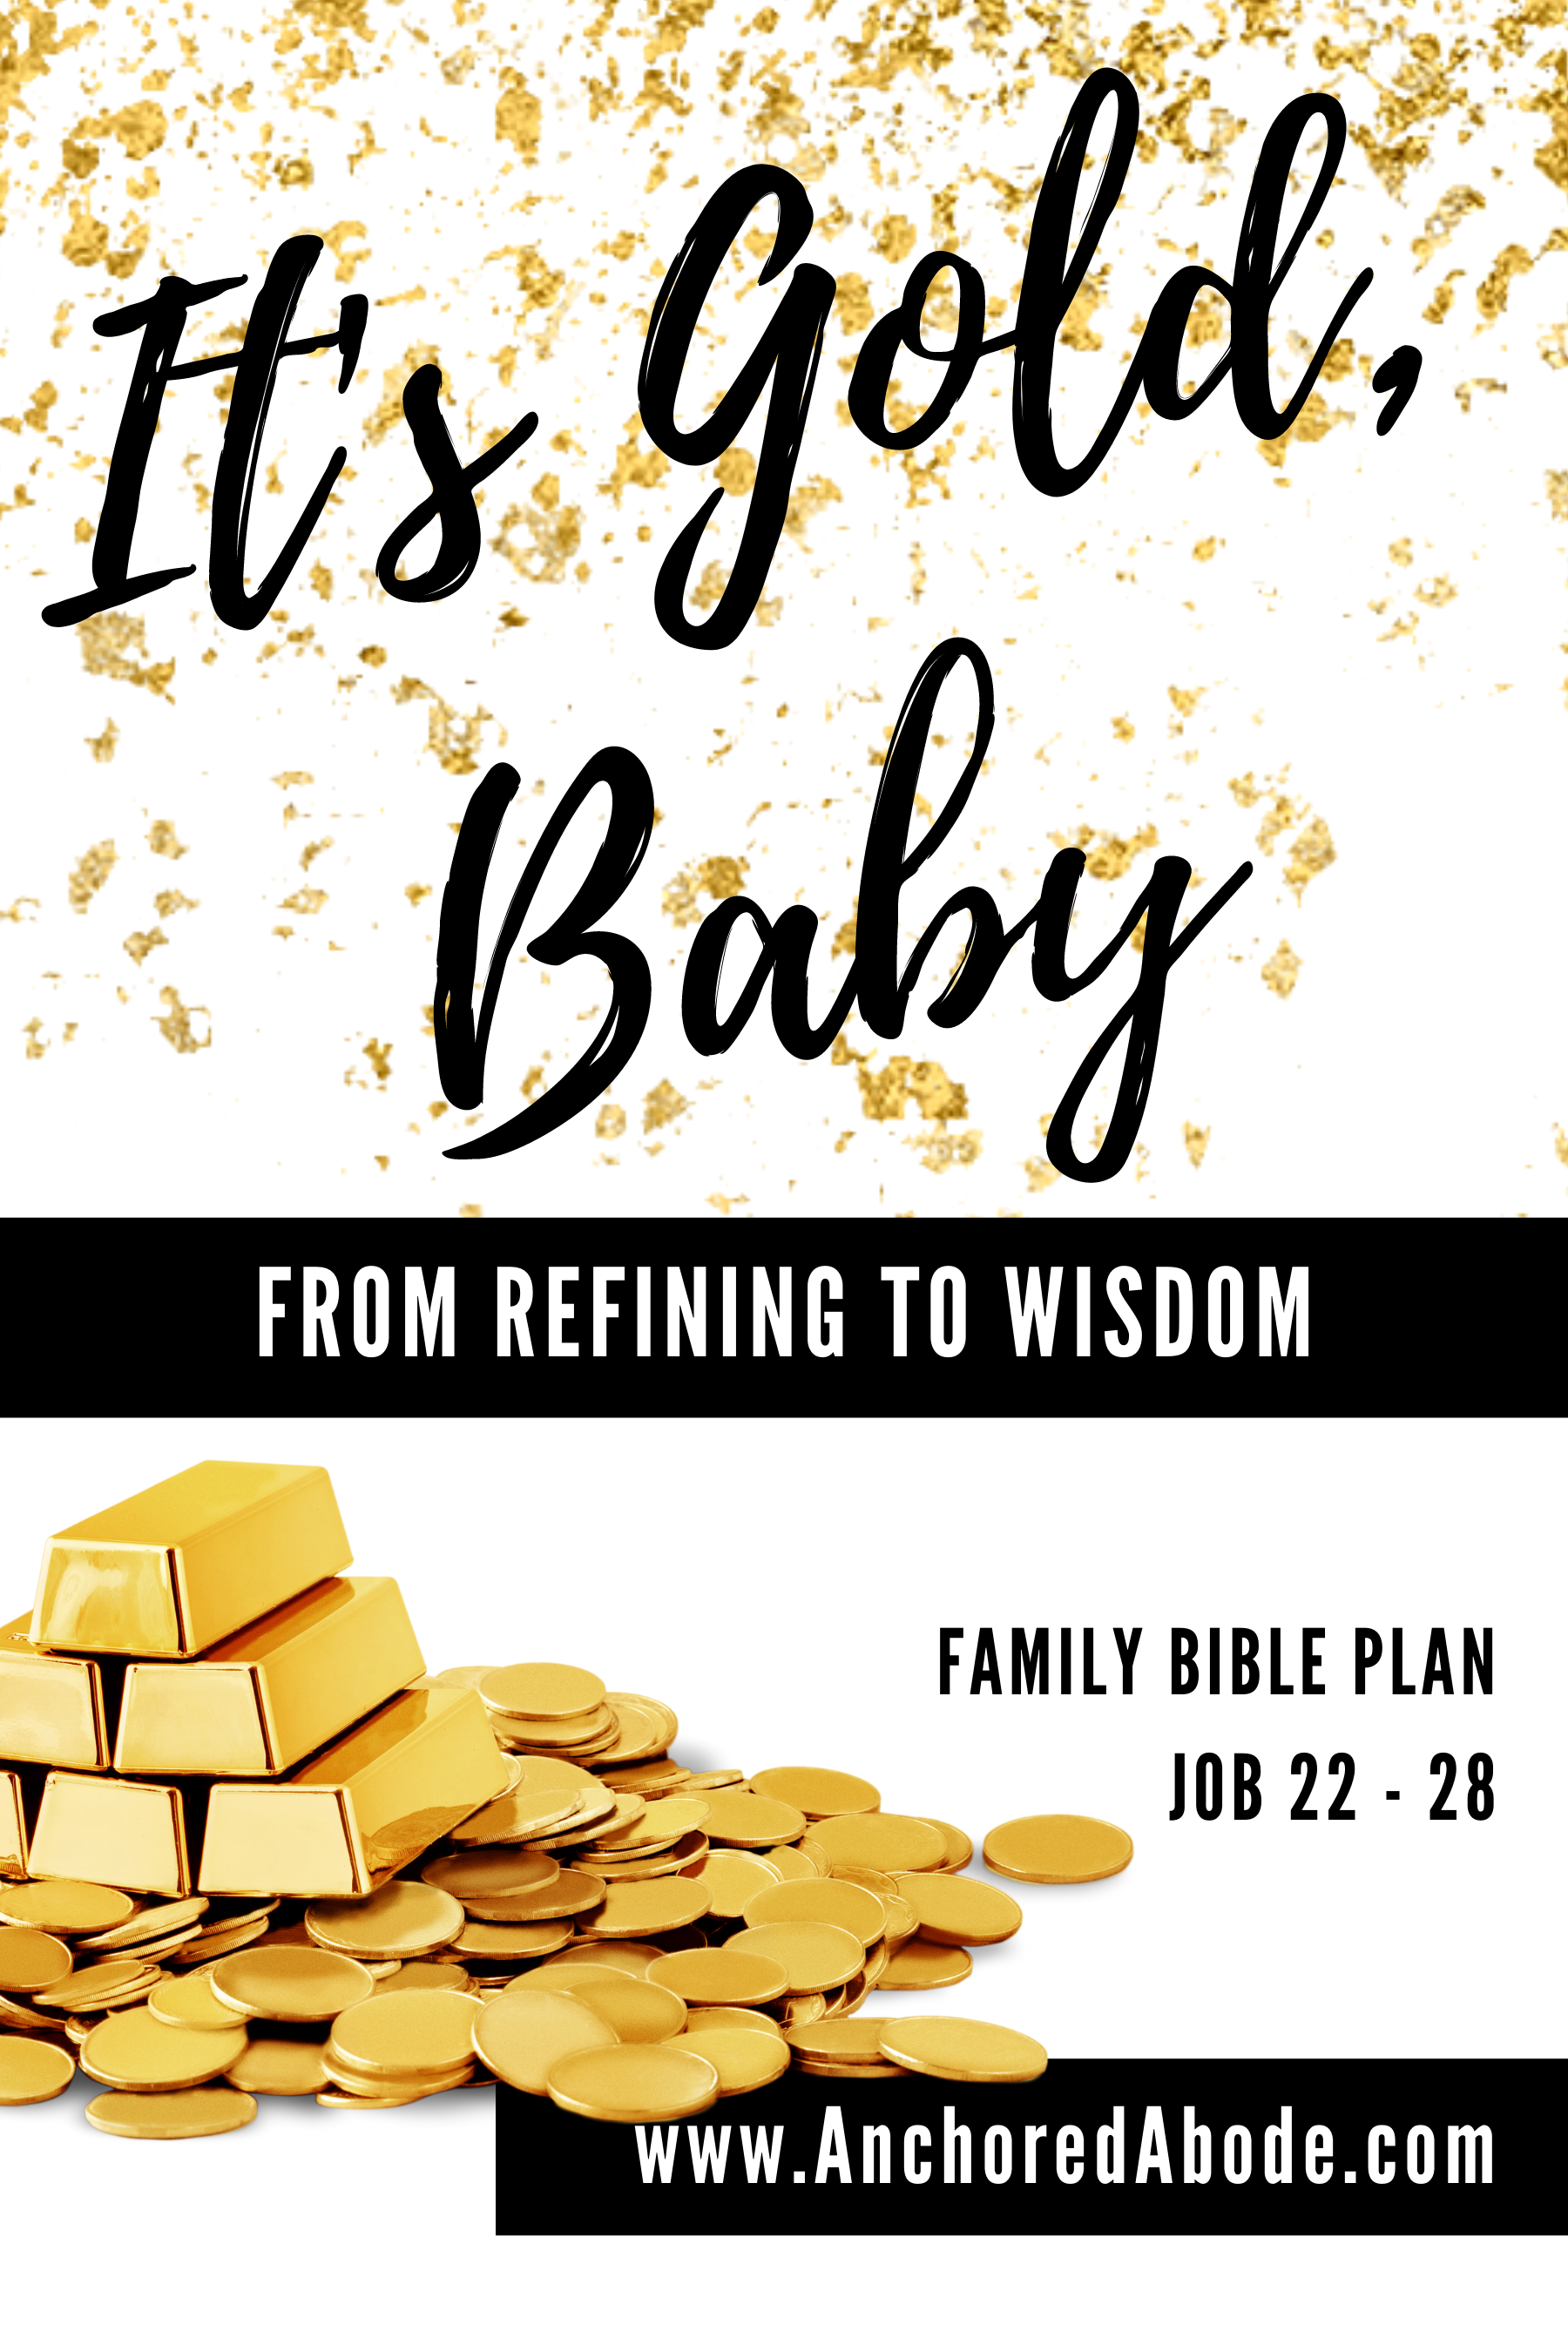 It’s Gold, Baby | From refining to wisdom (Job 22-28)